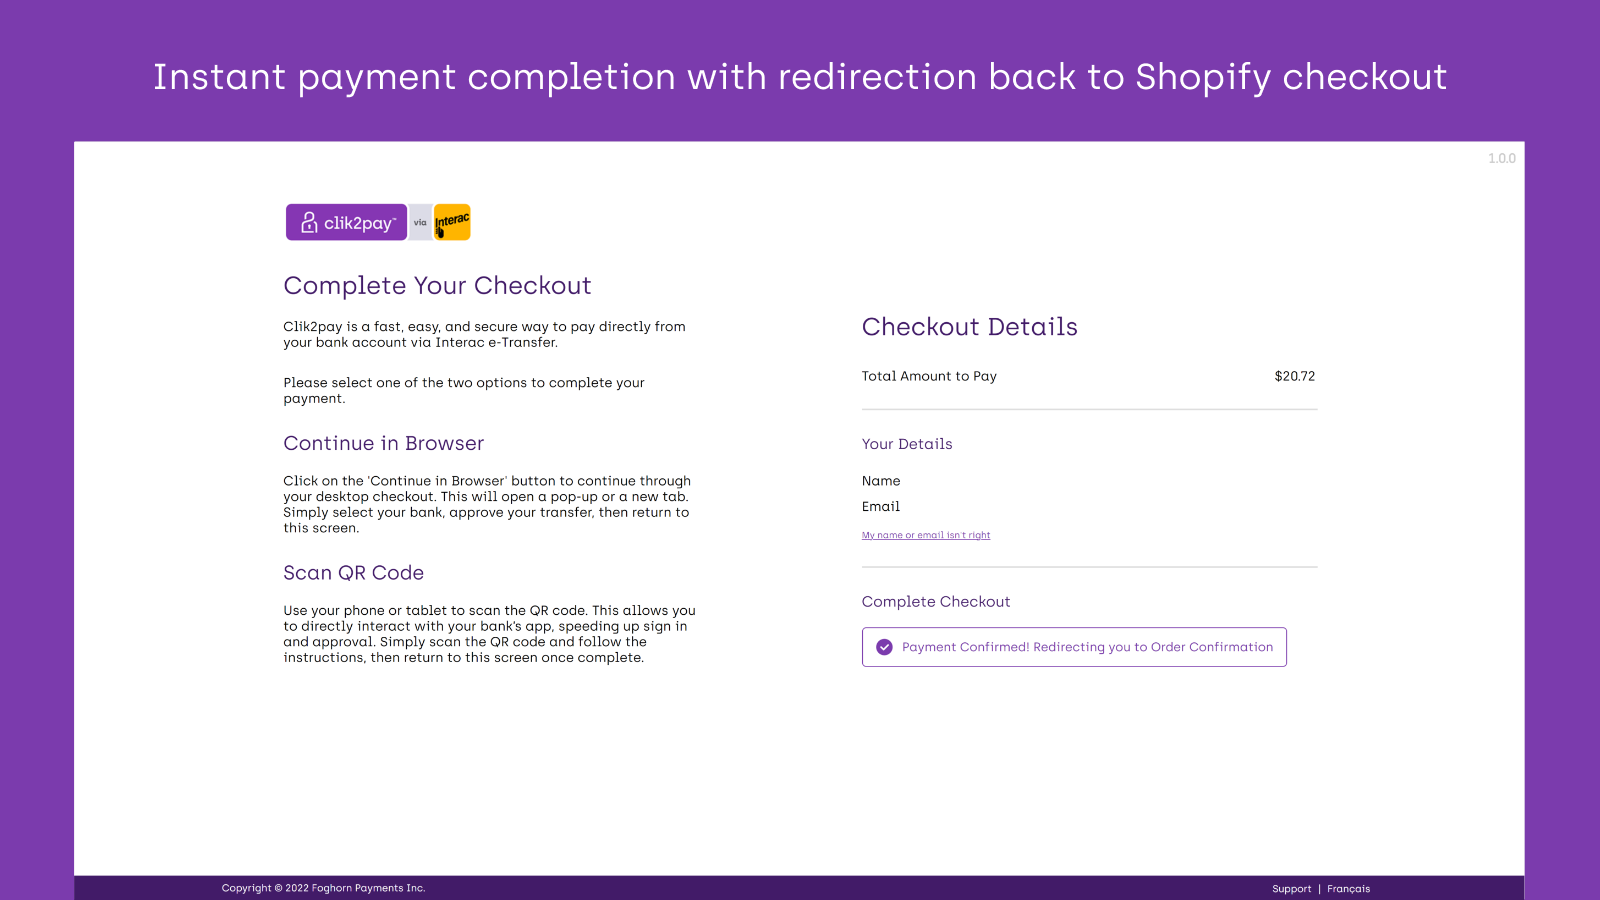 Instant payment completion with redirection back to Shopify